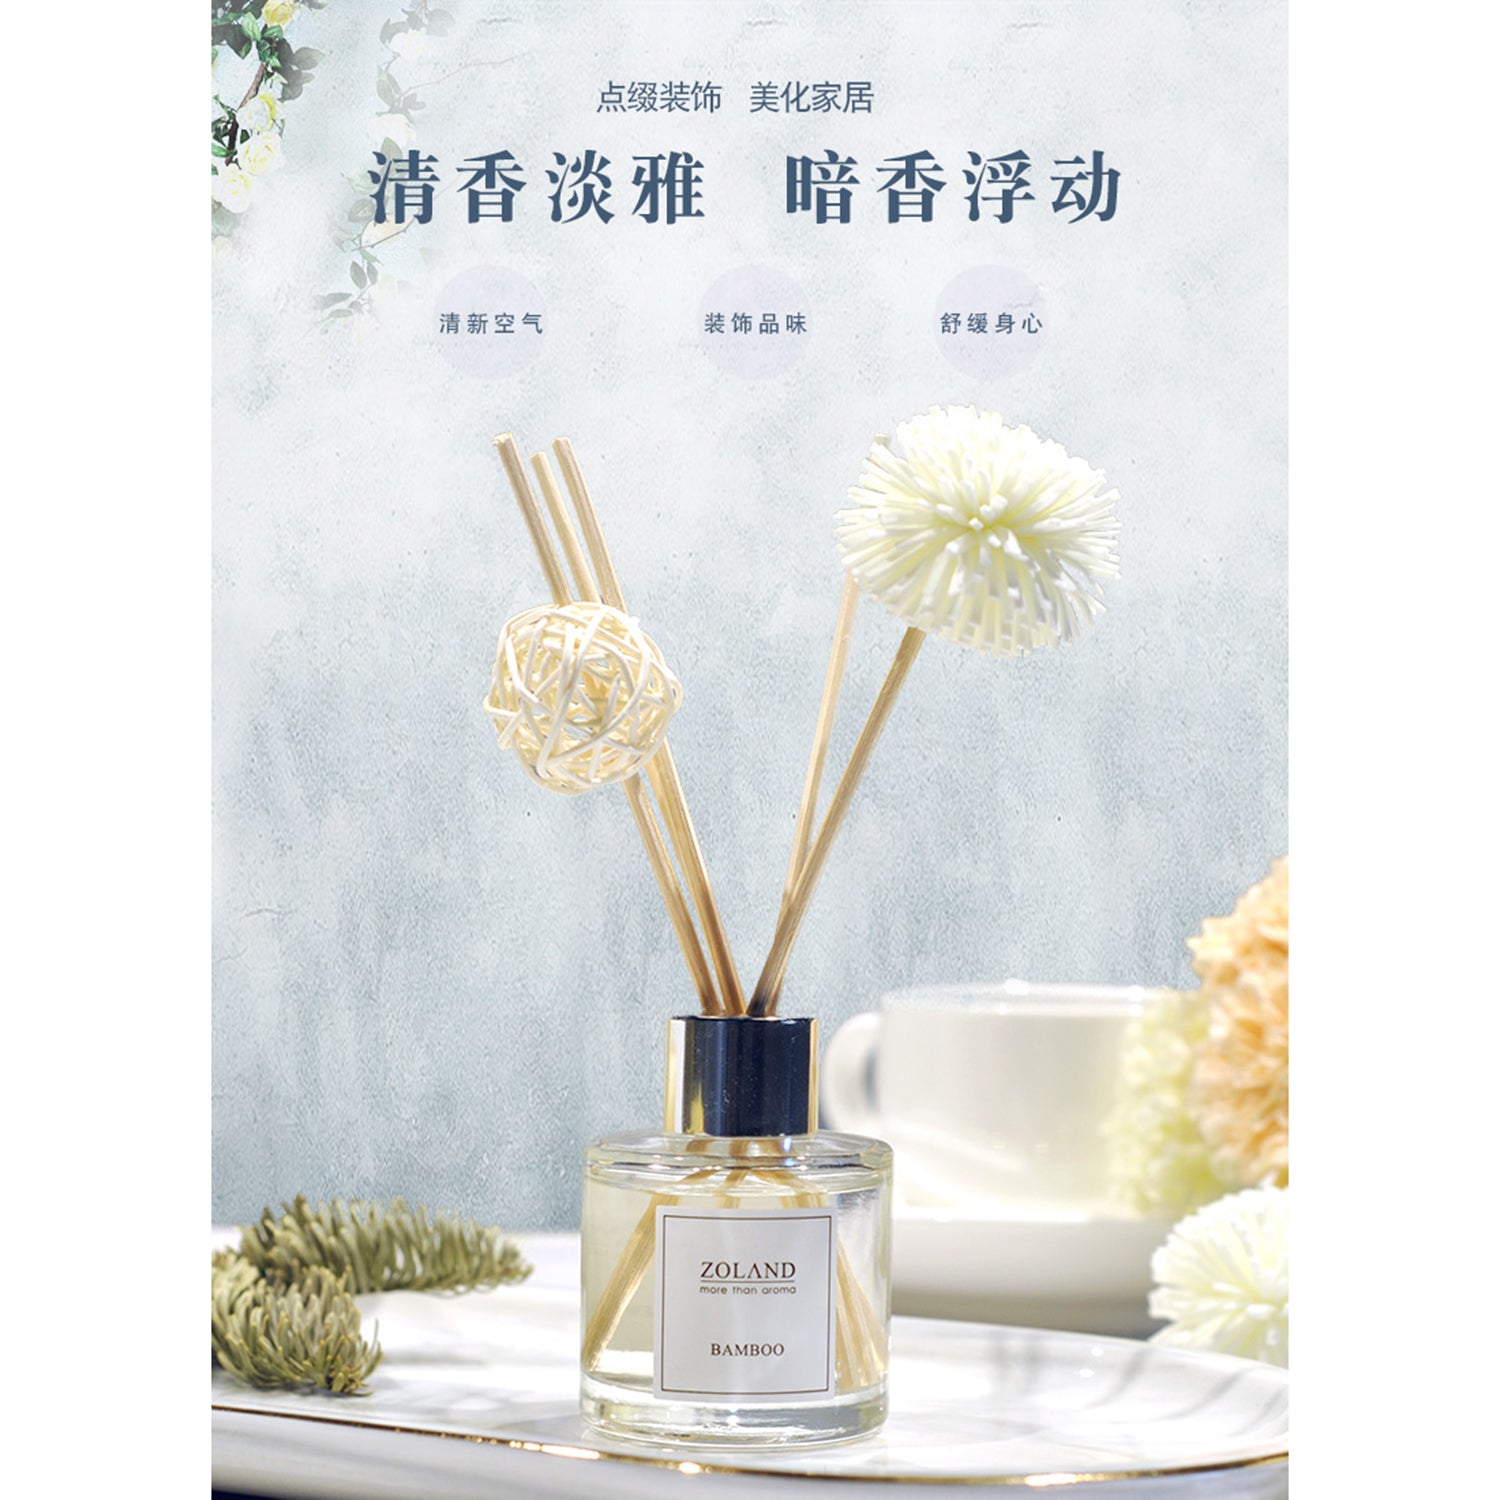 ZOLAND Reed Diffuser 50ML Premium Essential Oil Aromatherapy Round Bottle with Reed Stick, Sola Flower and Rattan Ball Reed Diffuser ZOLAND 